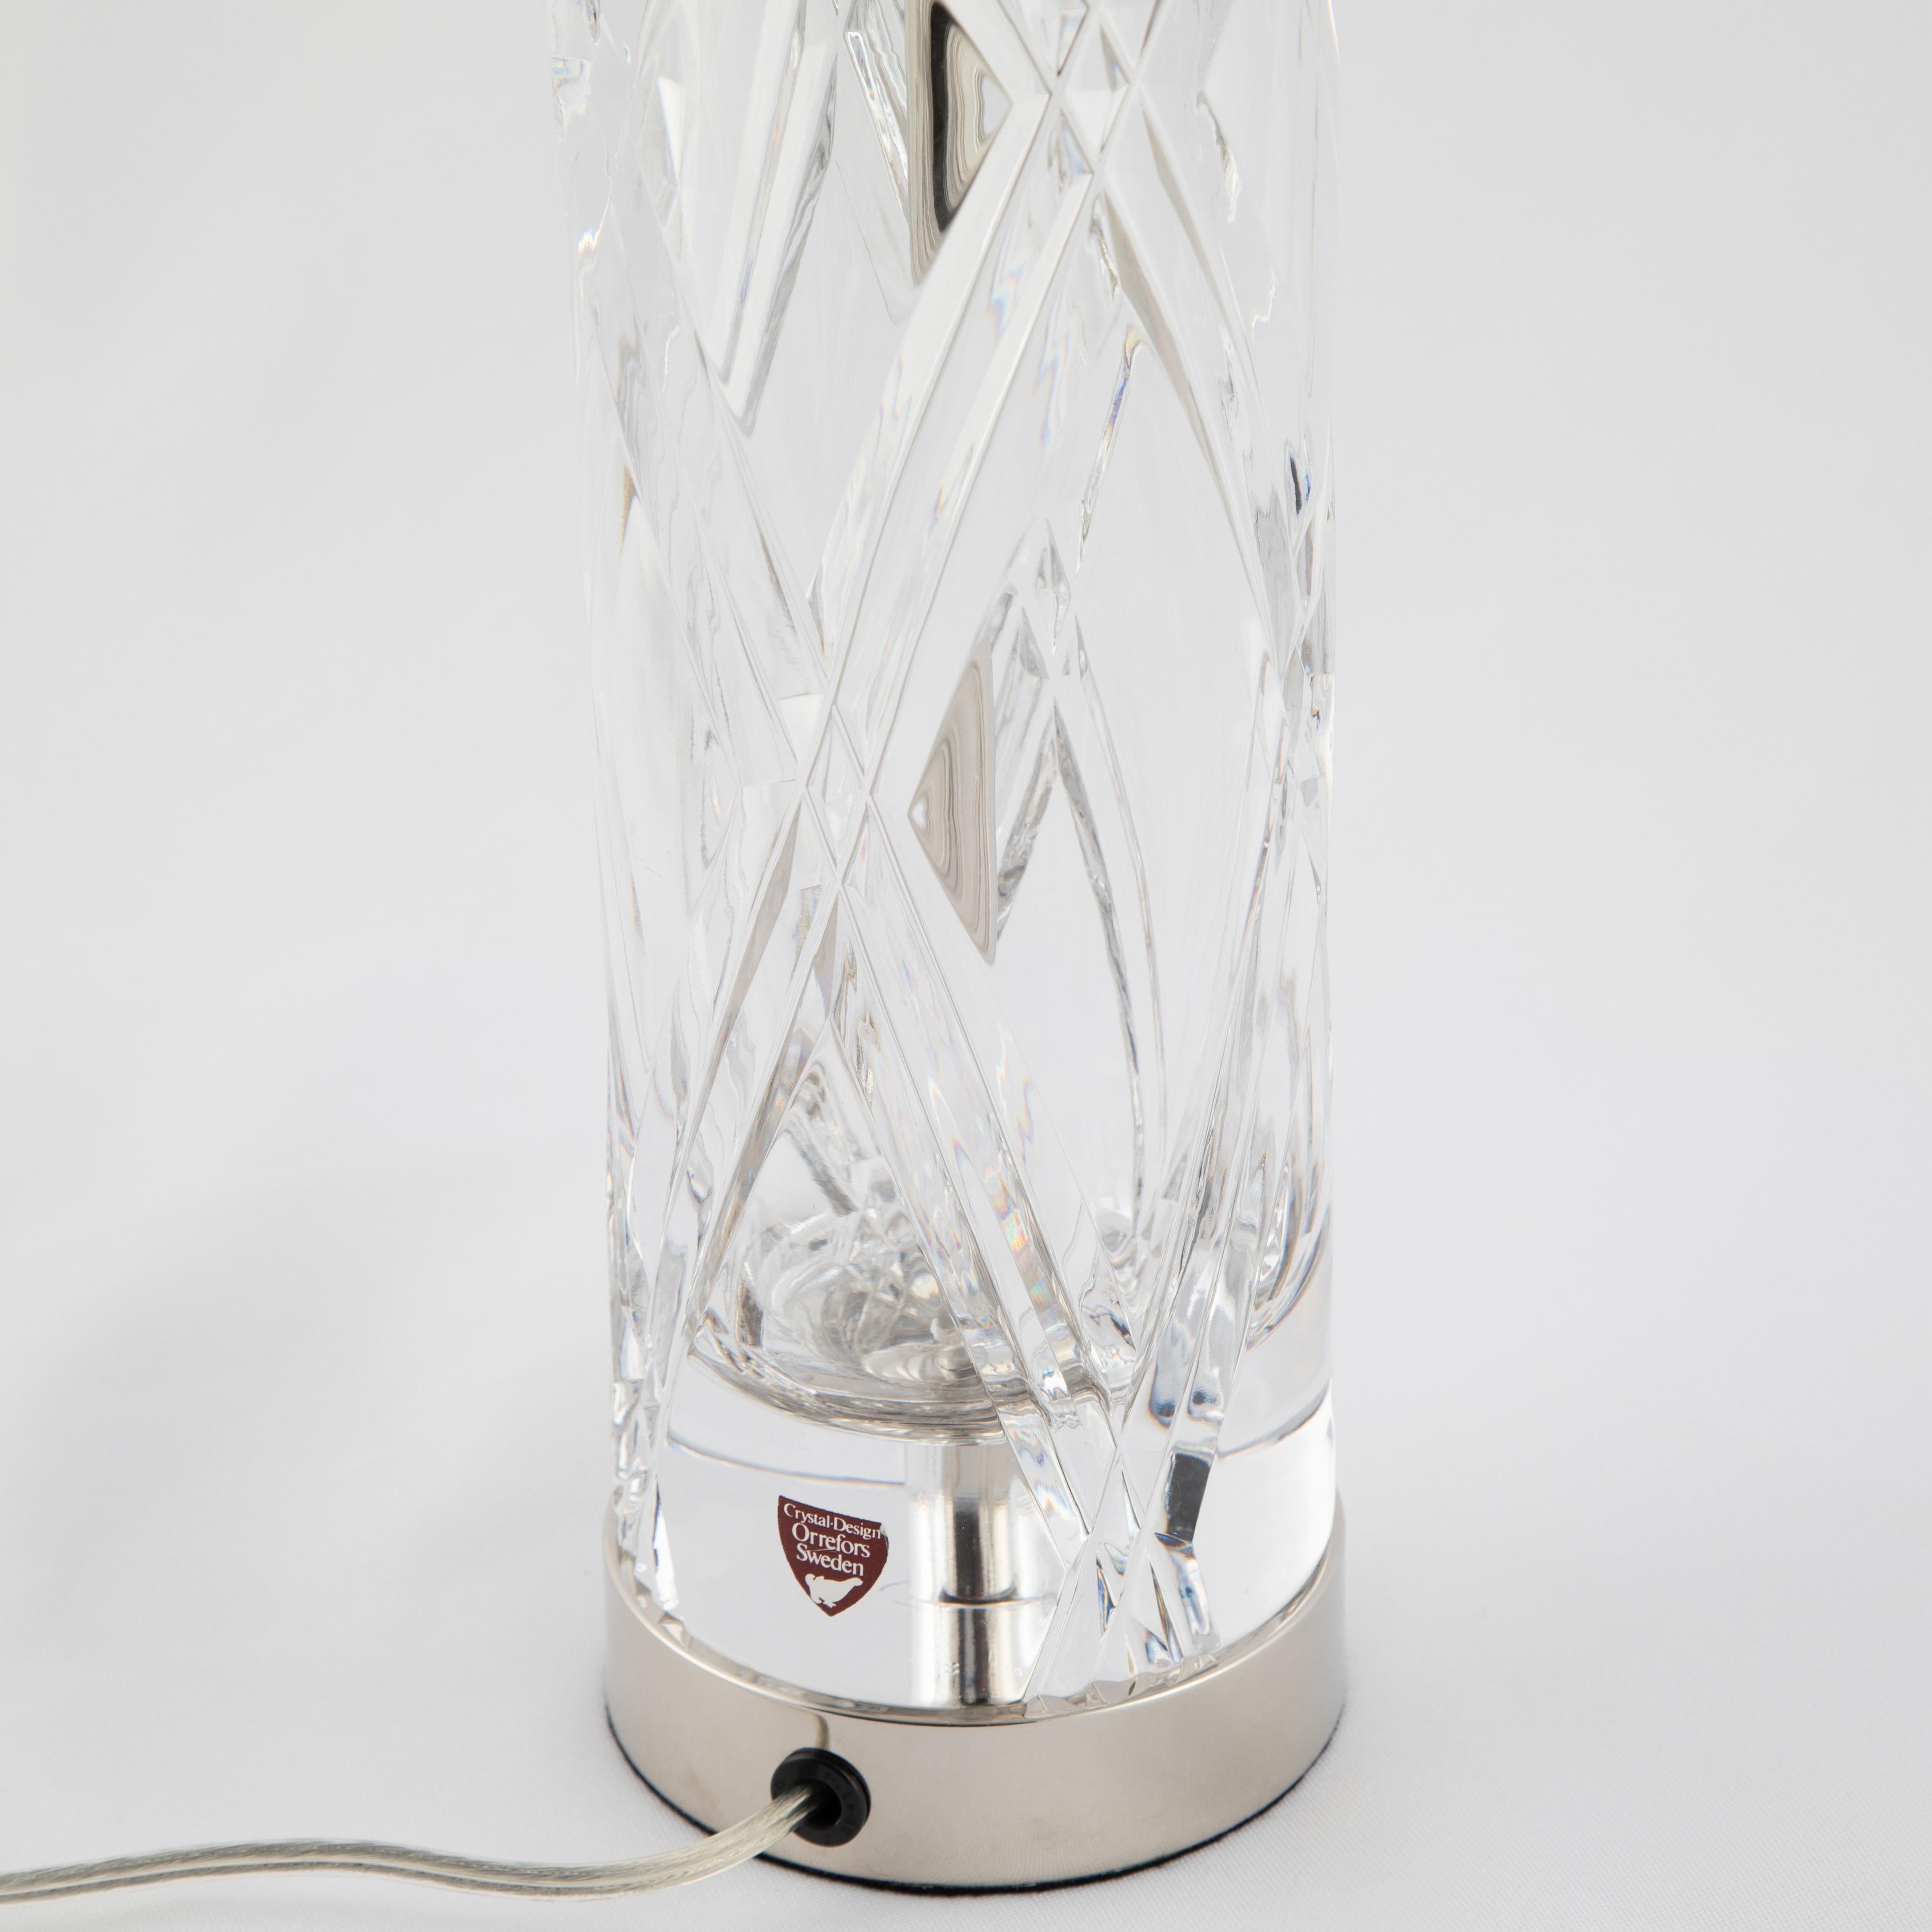 Olle Alberius for Orrefors Handcut Crystal Table Lamps, circa 1970s For Sale 3